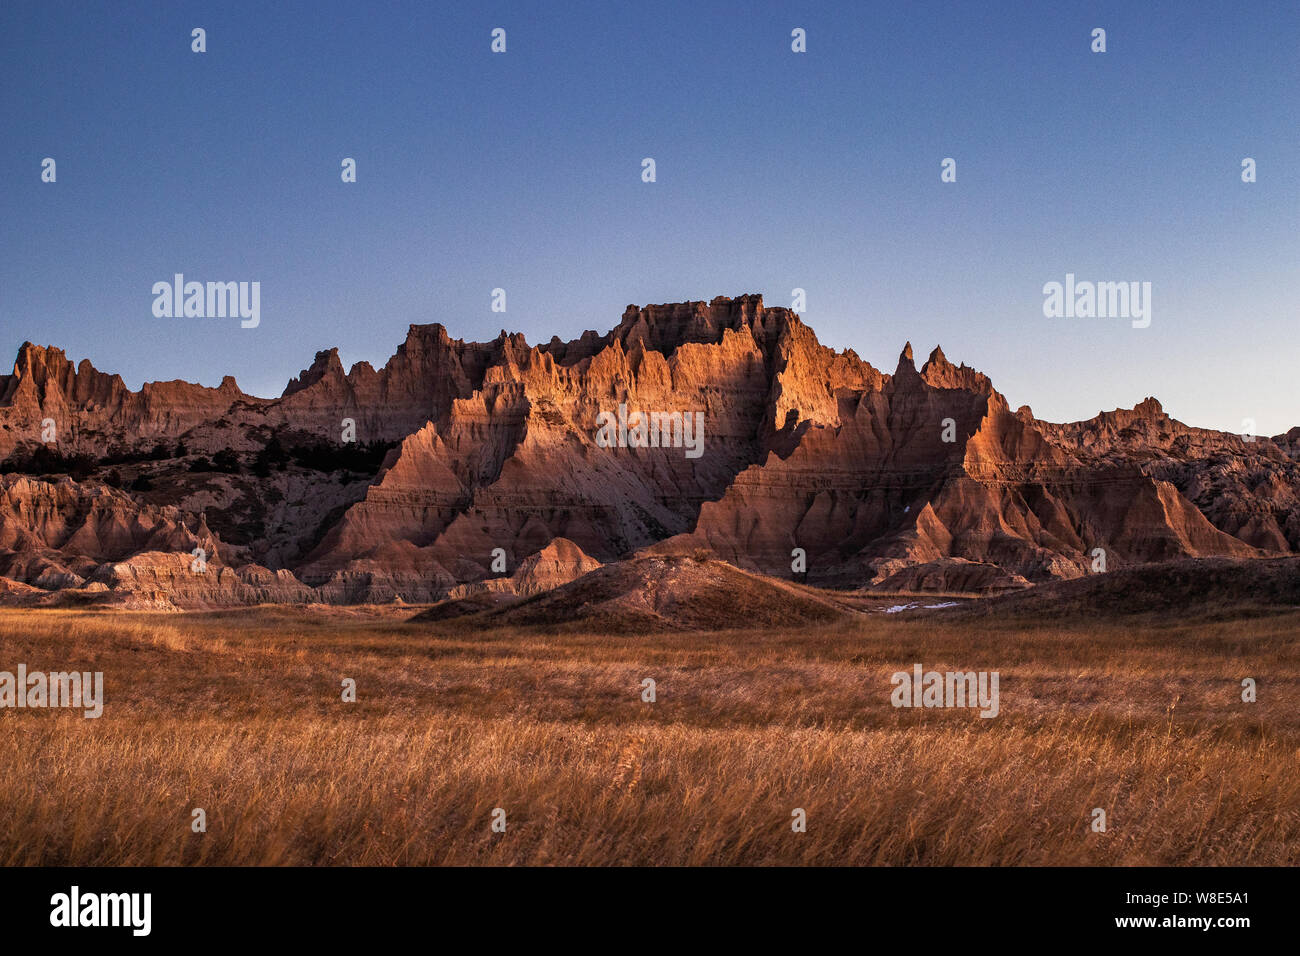 Badlands National Park is in South Dakota. Its dramatic landscapes span layered rock formations, steep canyons and towering spires. Stock Photo